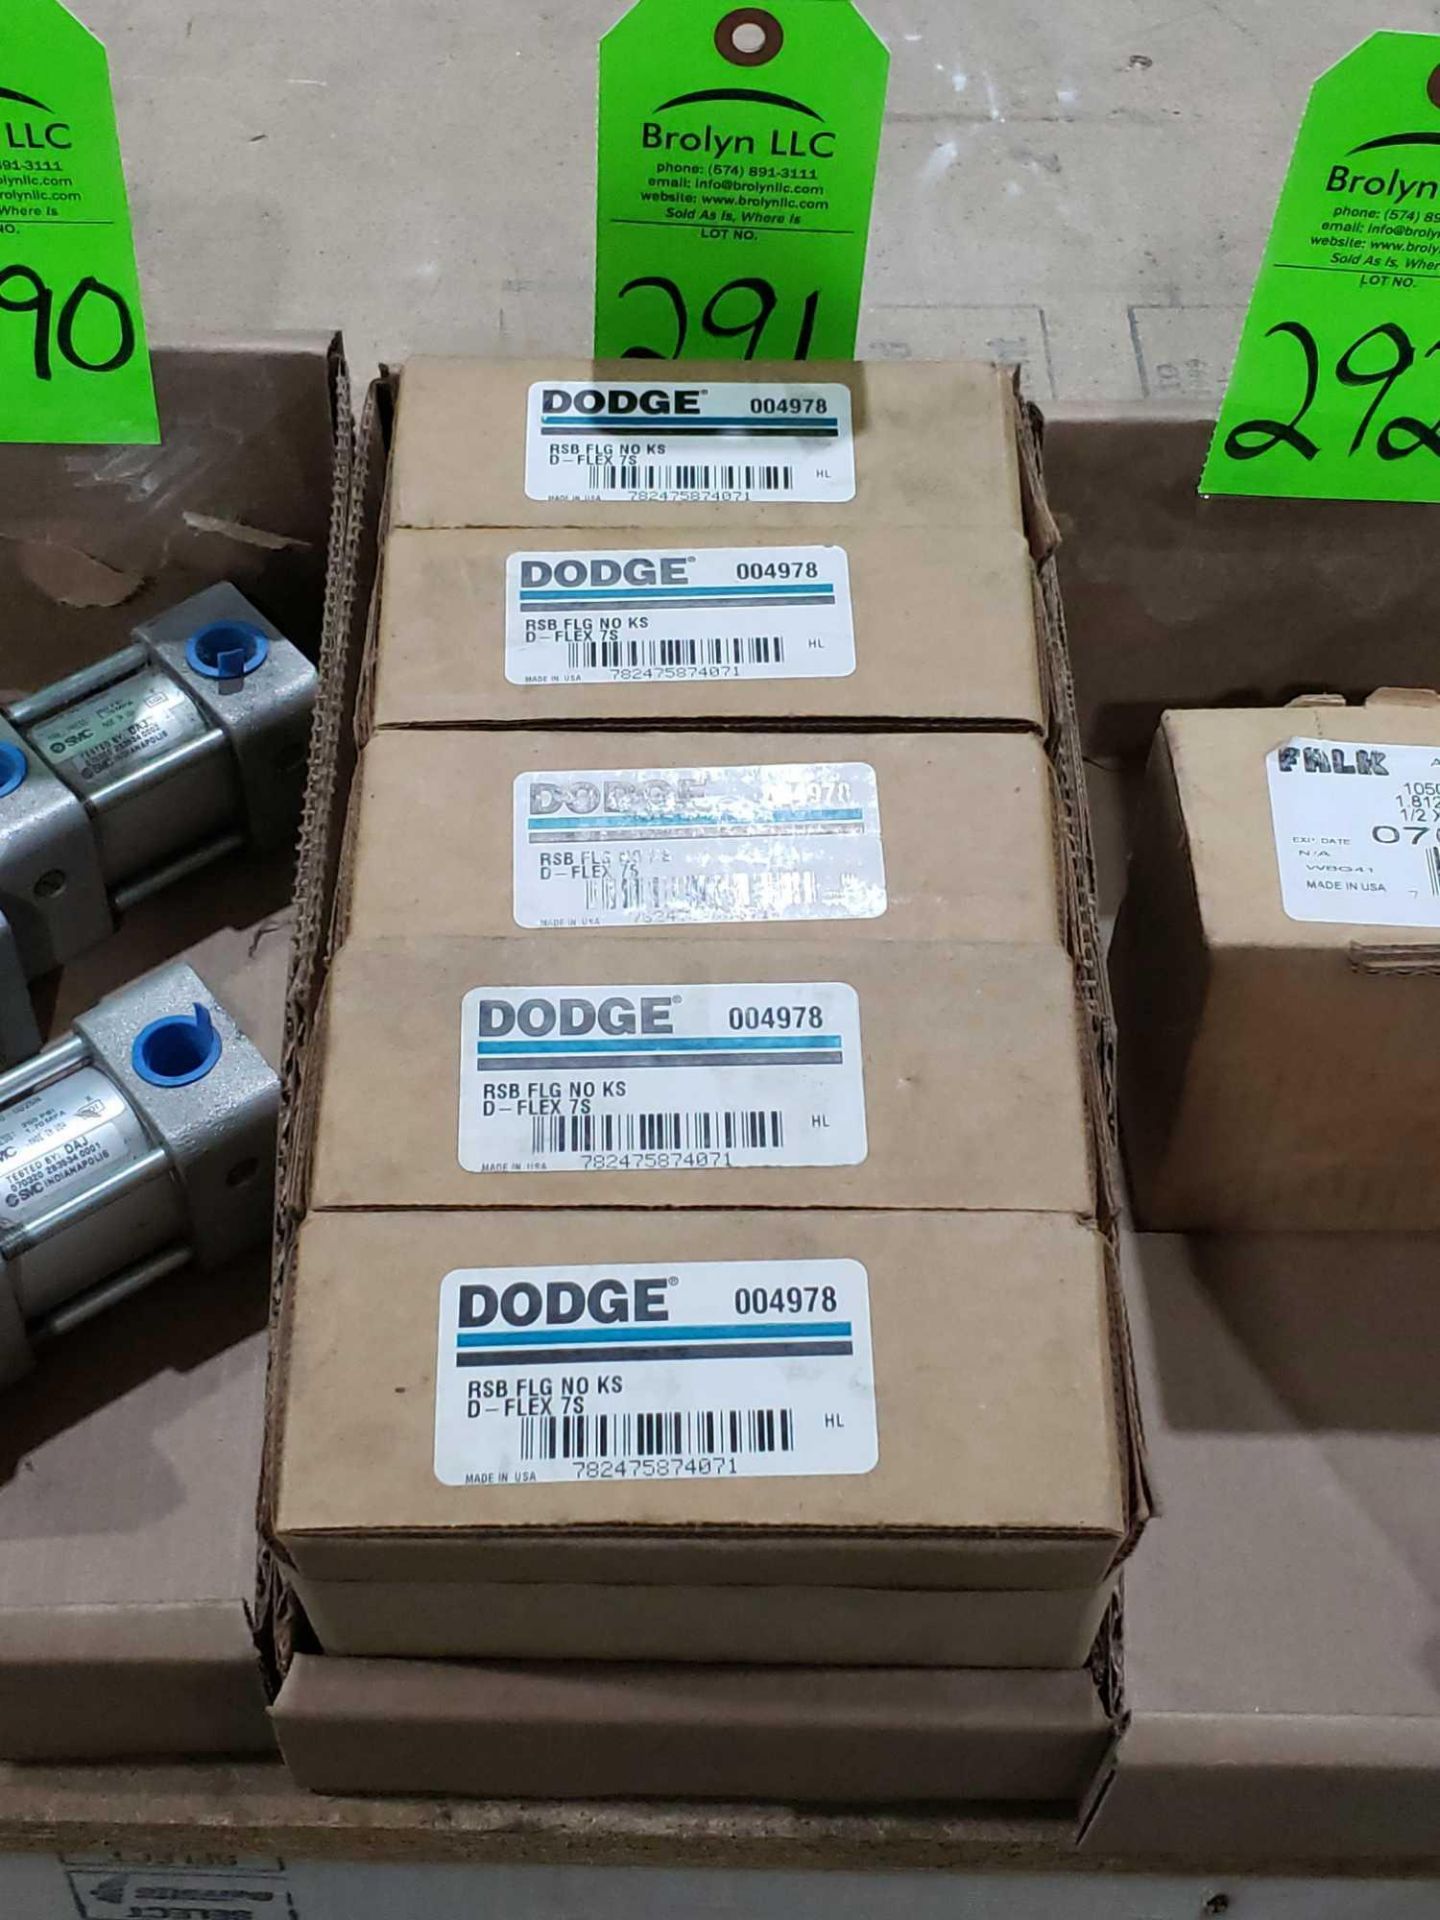 Qty 5 - Dodge model 004978. New in boxes.